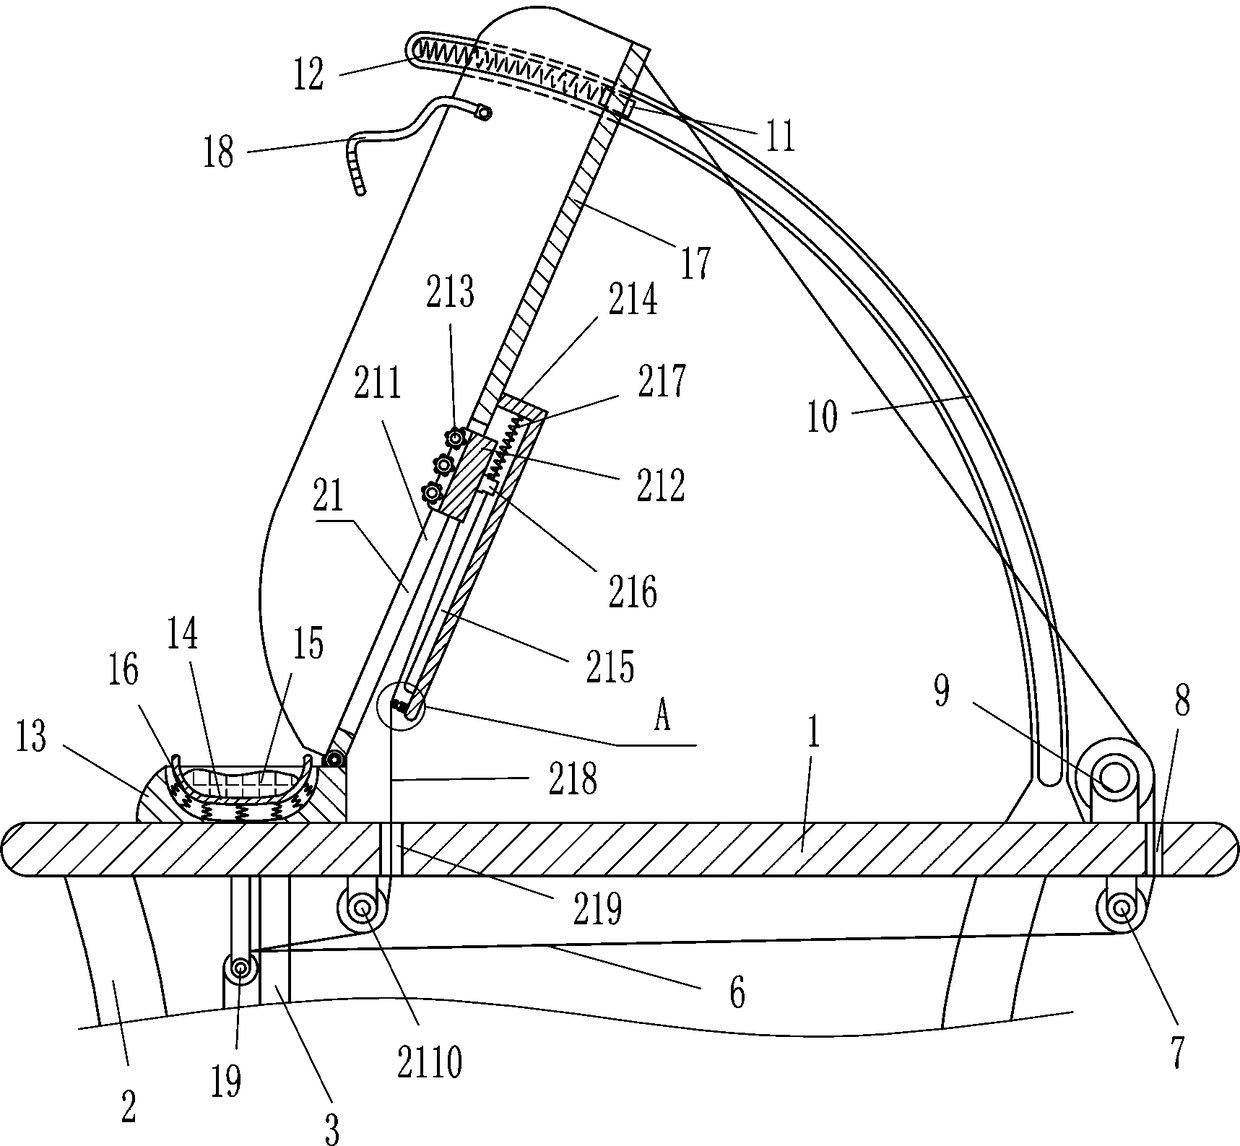 Orthopedic recovery device for elbow fracture